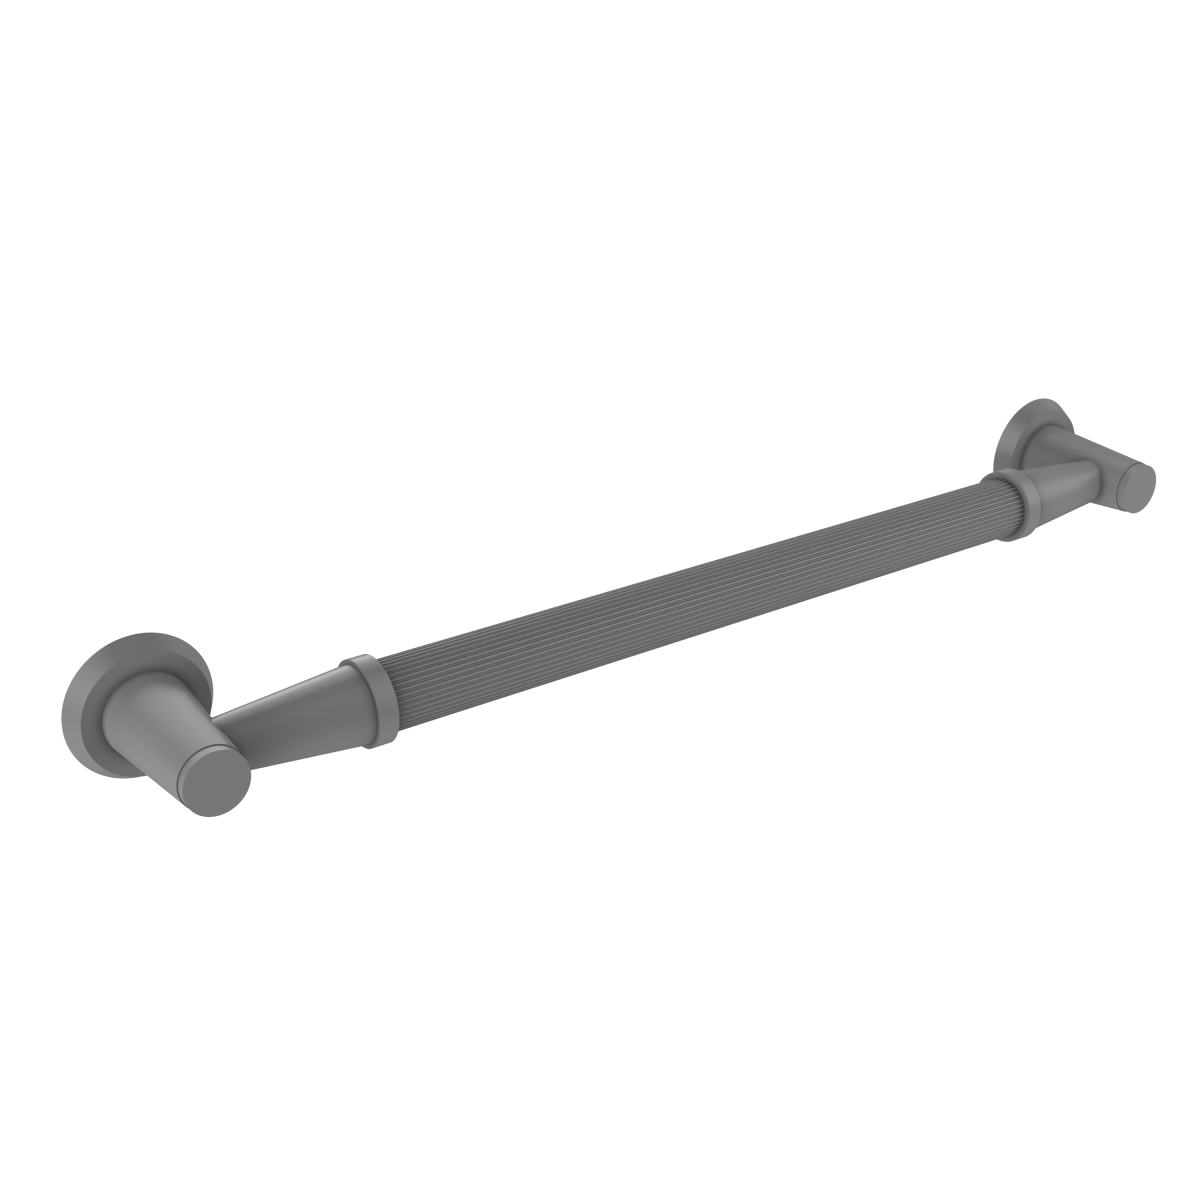 Picture of Allied Brass MD-GRR-24-GYM 24 in. Reeded Grab Bar, Matte Gray - 3.5 x 26 x 24 in.